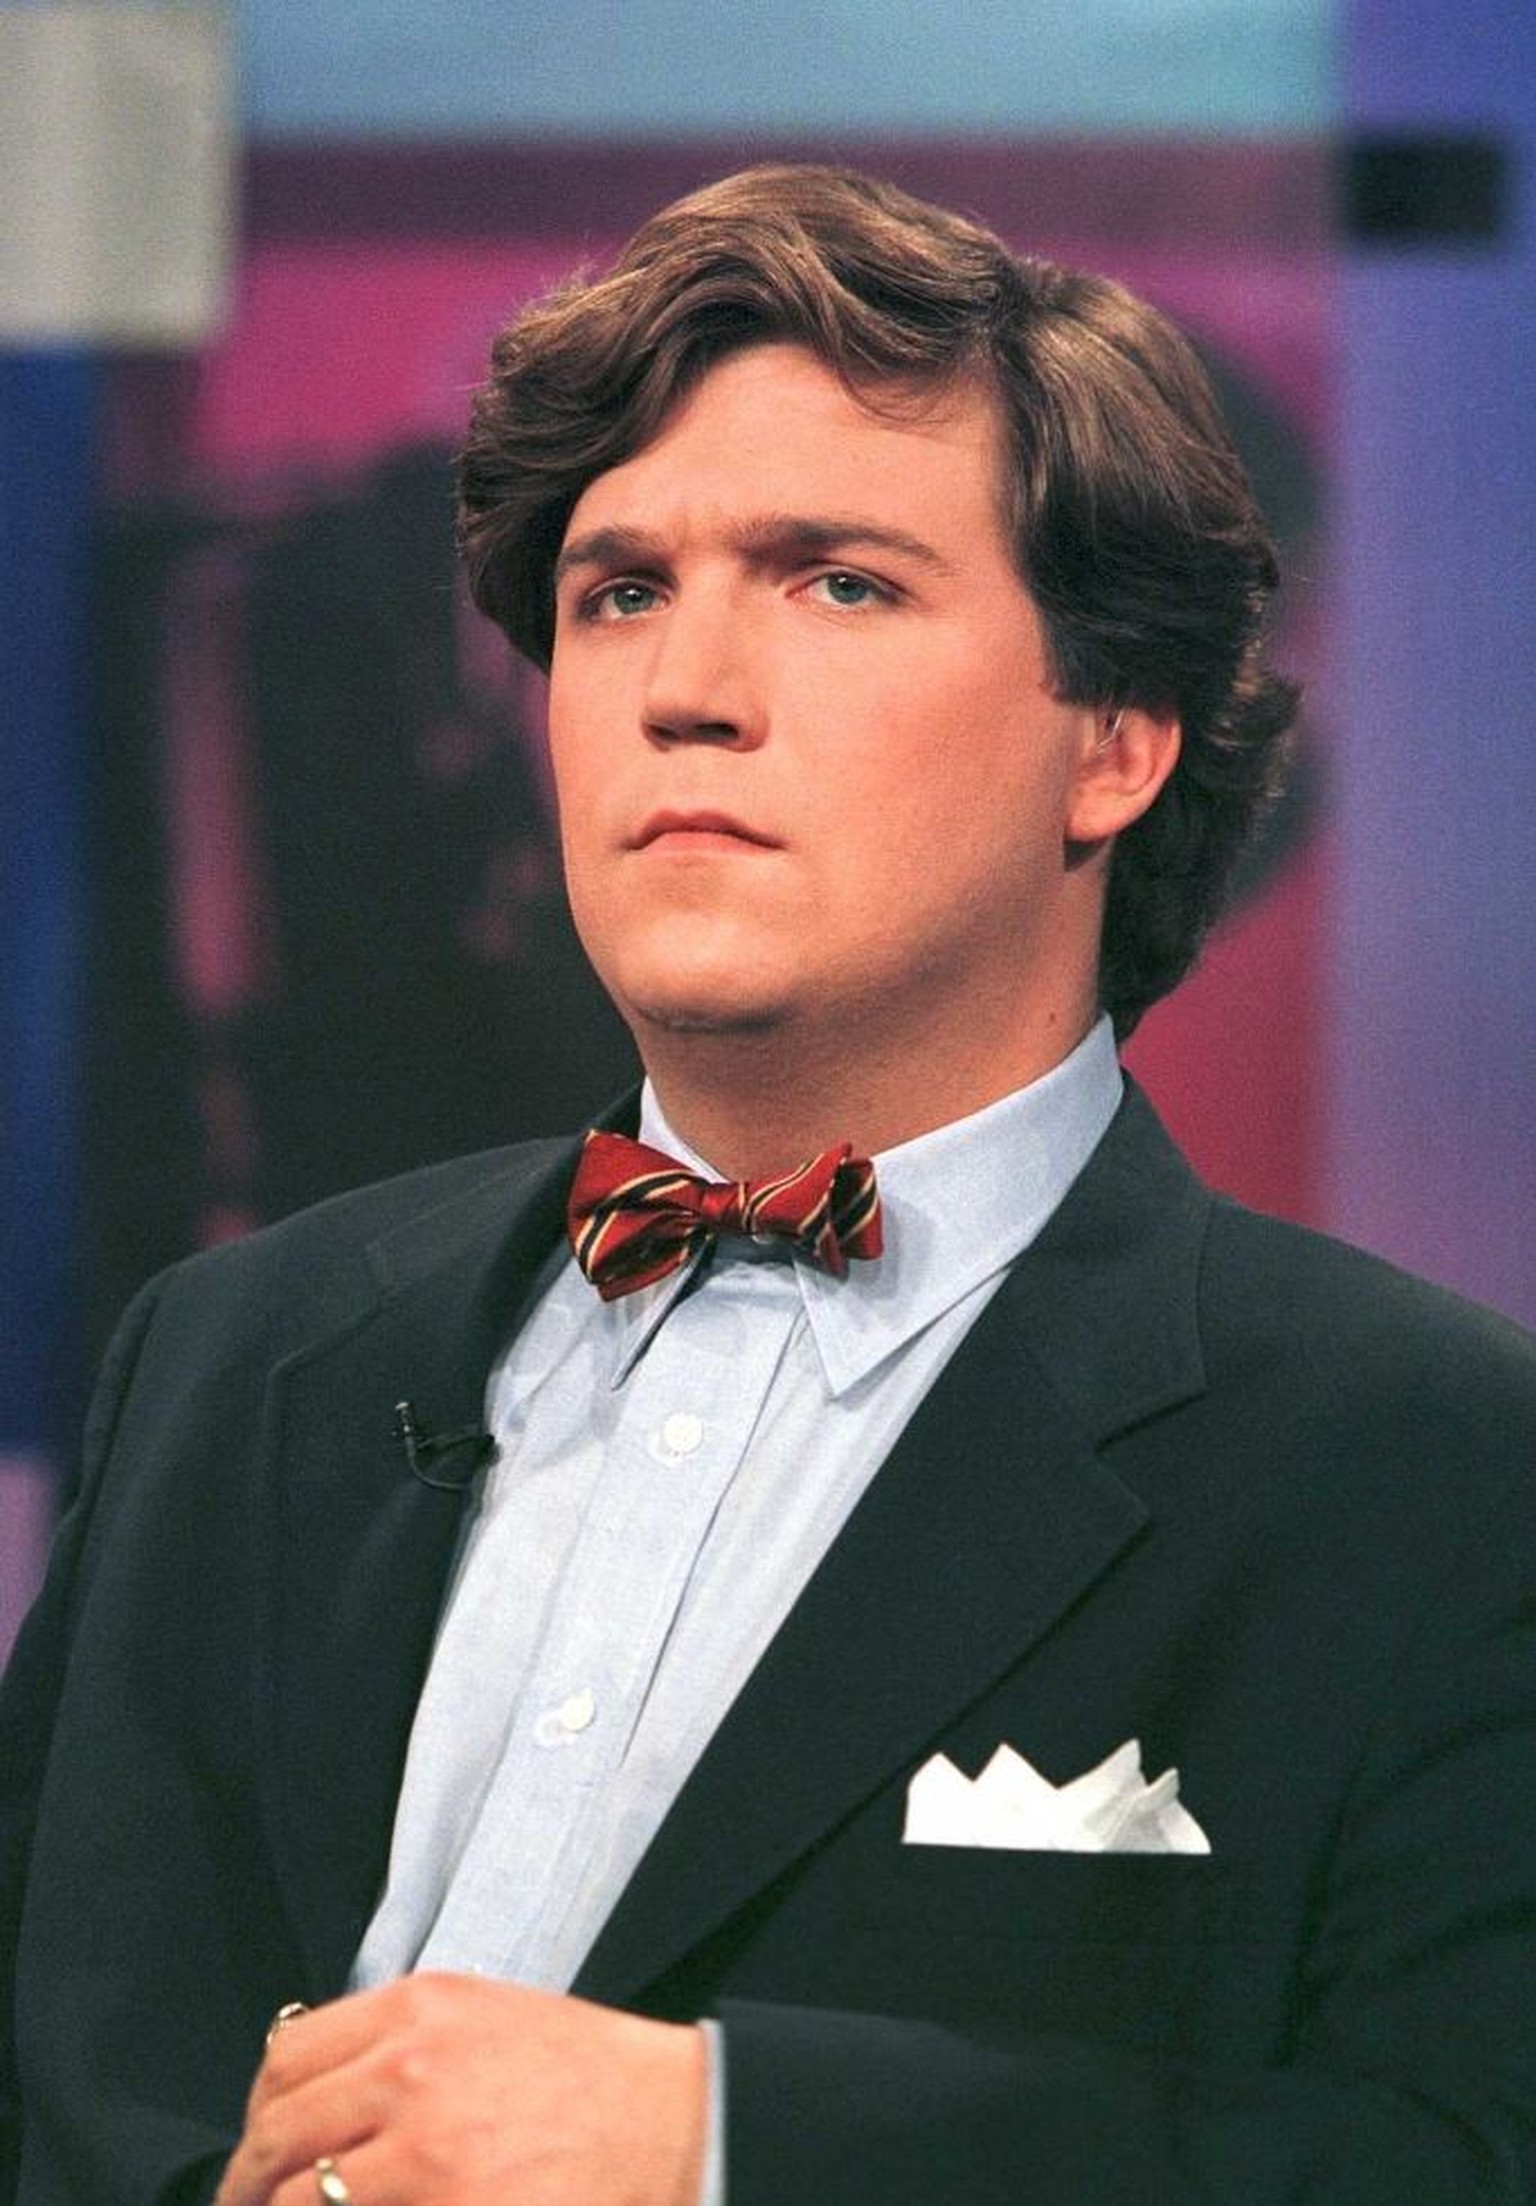 Tucker Carlson of the Weekly Standard during a CNN National Town Meeting on the Media discussing coverage of the White House sex scandal, Arlington, Virginia, January 28, 1998. (Photo by Richard Ellis ...